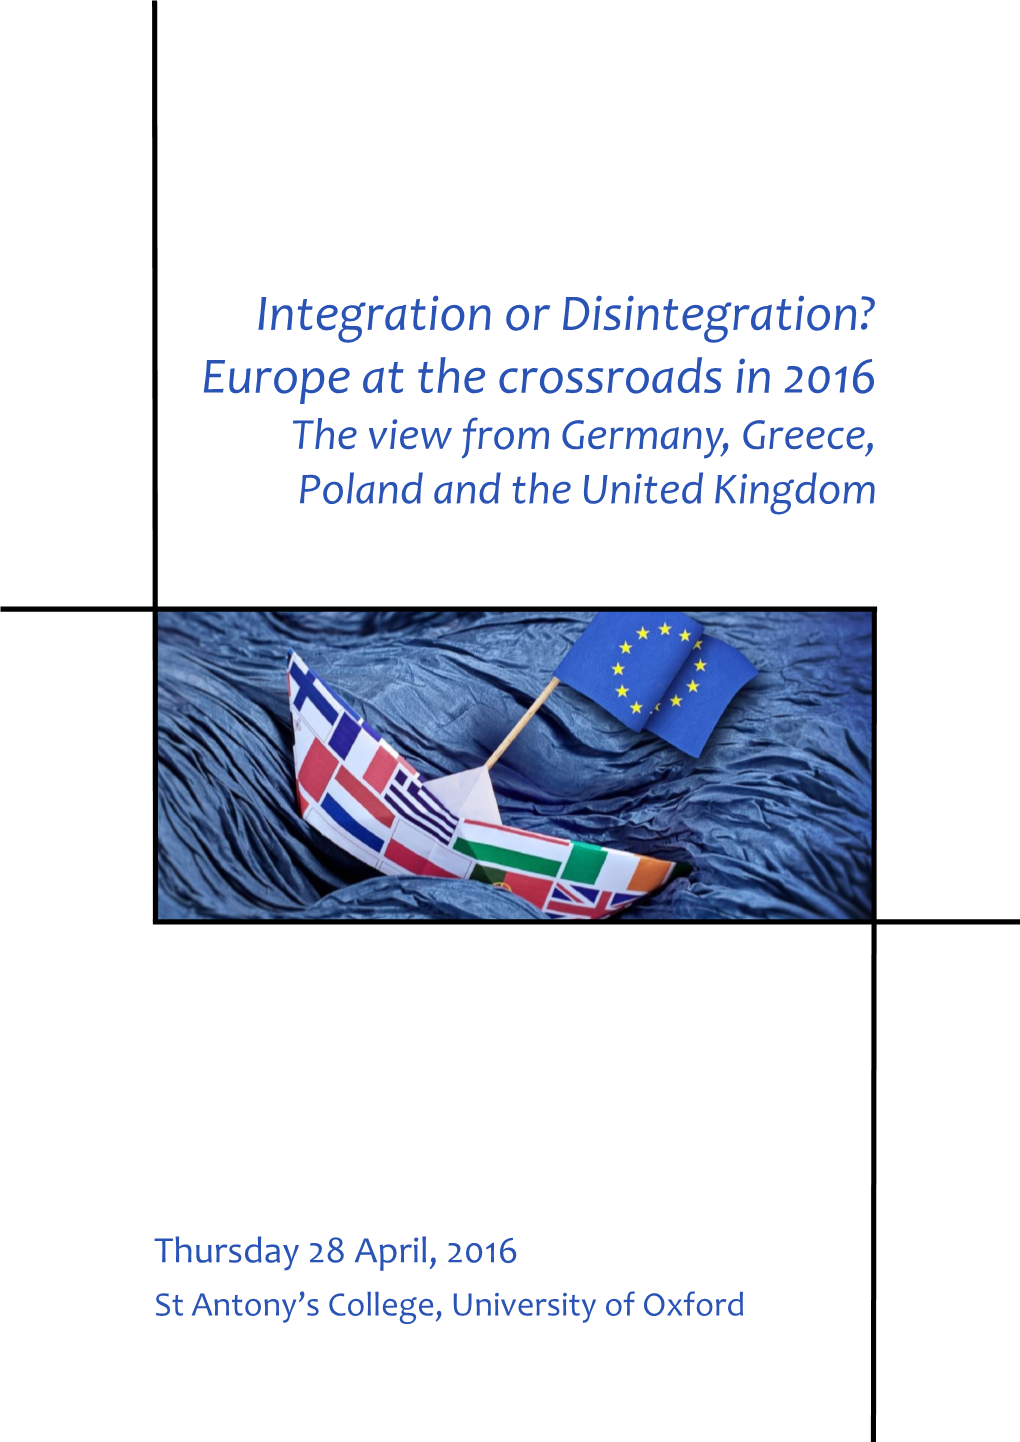 Integration Or Disintegration? Europe at the Crossroads in 2016 the View from Germany, Greece, Poland and the United Kingdom